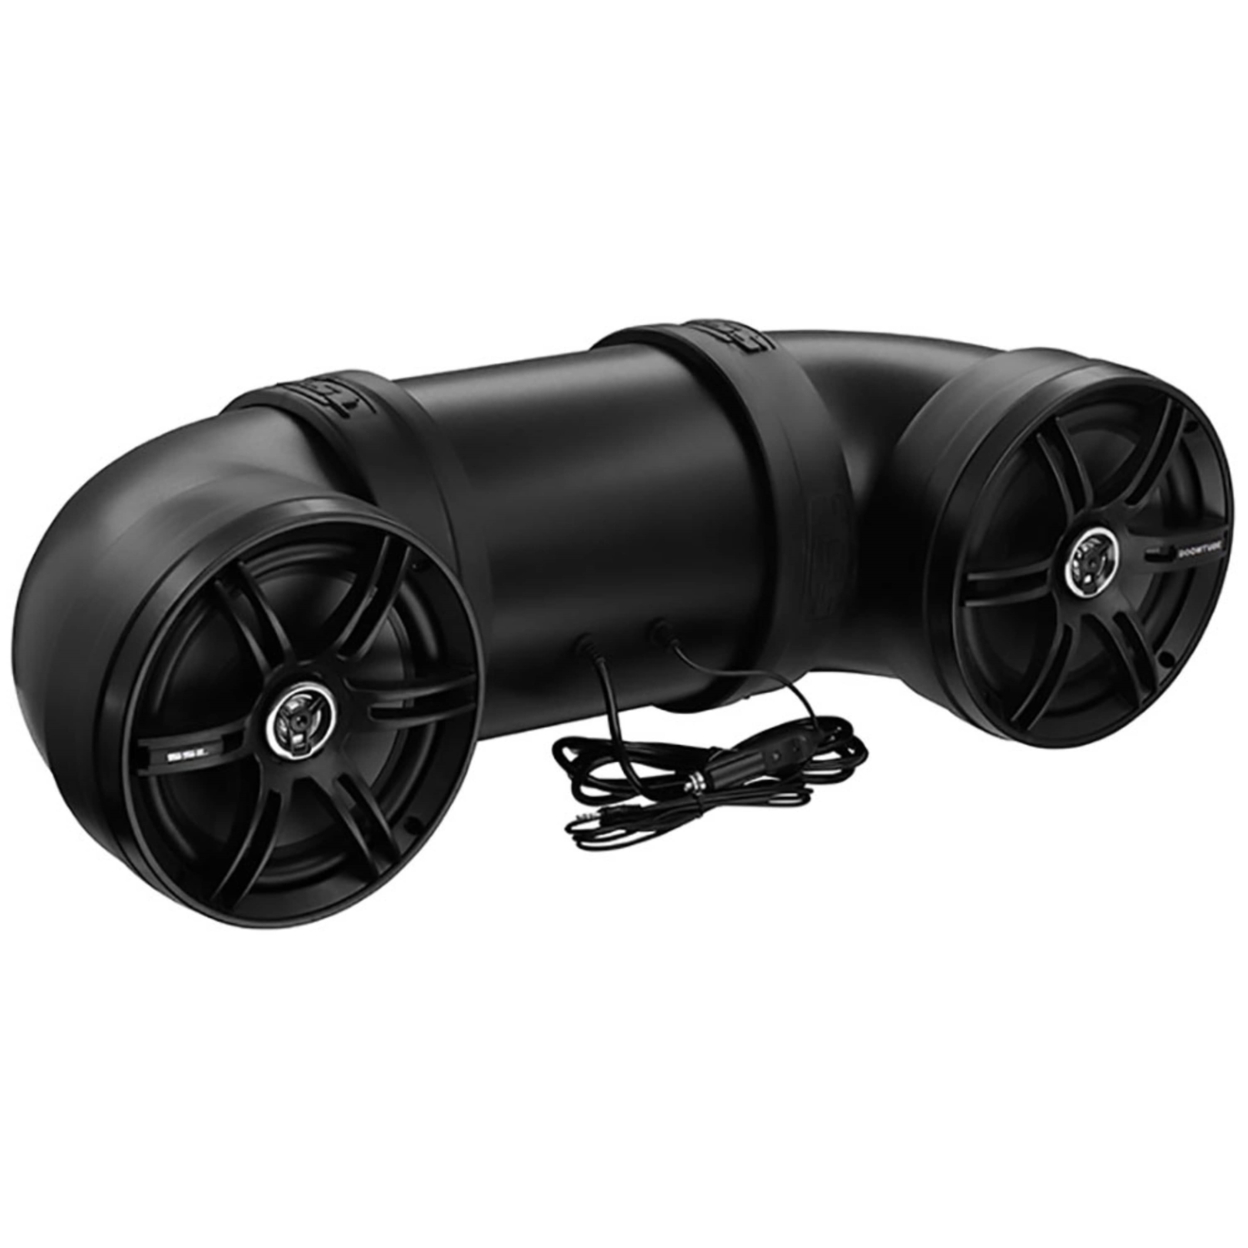 SSL ATV UTV Weatherproof Sound System - 8 Inch Speakers, 1 Inch Tweeters, Amplified, Bluetooth, Aux-In, For 12 Volt Vehicles